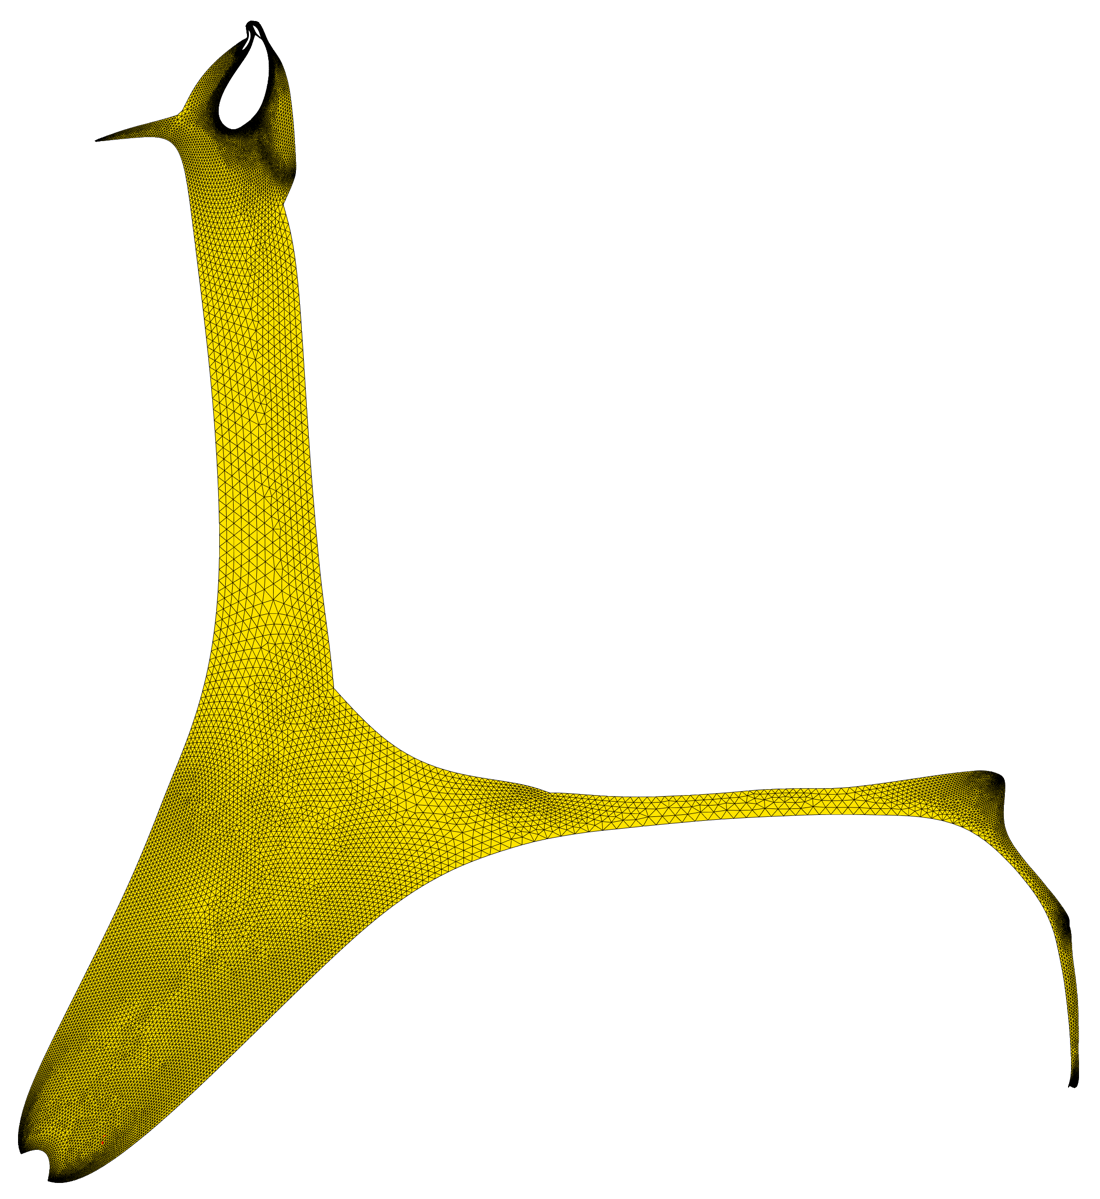 A picture containing yellow, banana, game, propeller

Description automatically generated